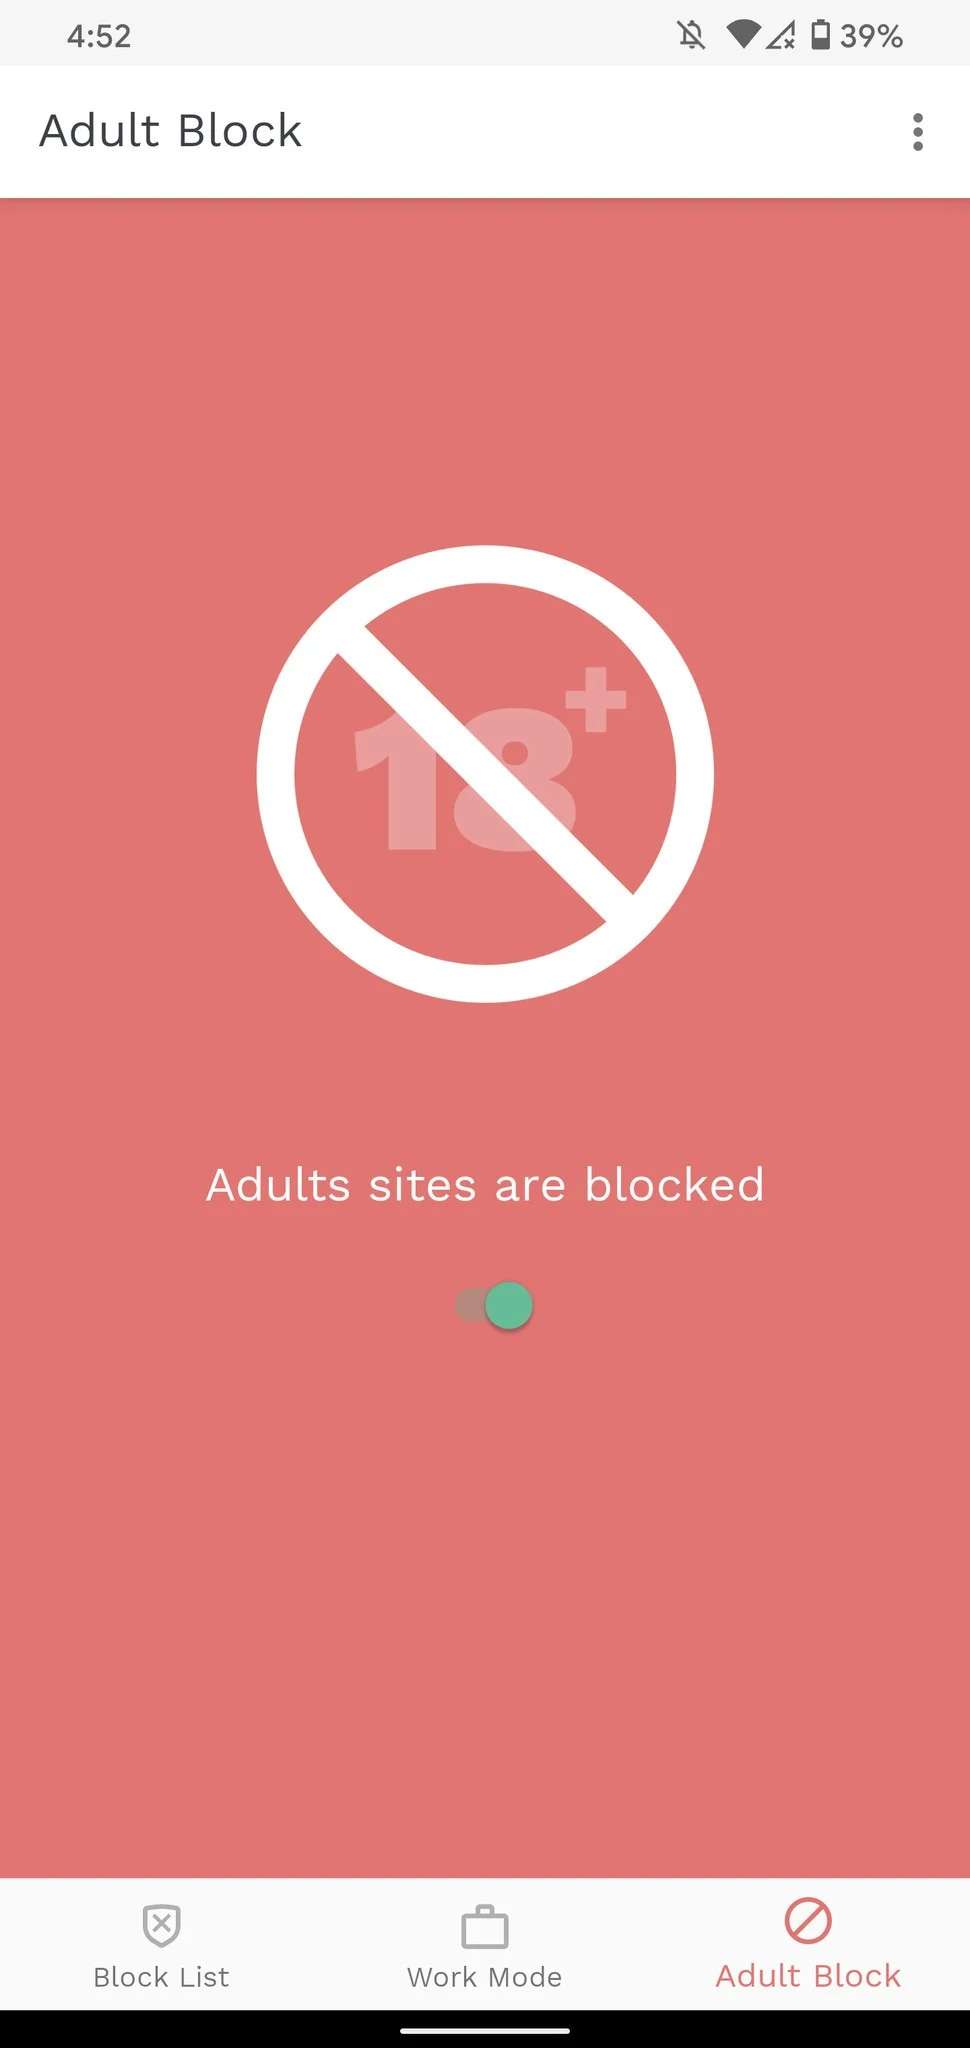 a screenshot showing that the Adult Block feature is enabled